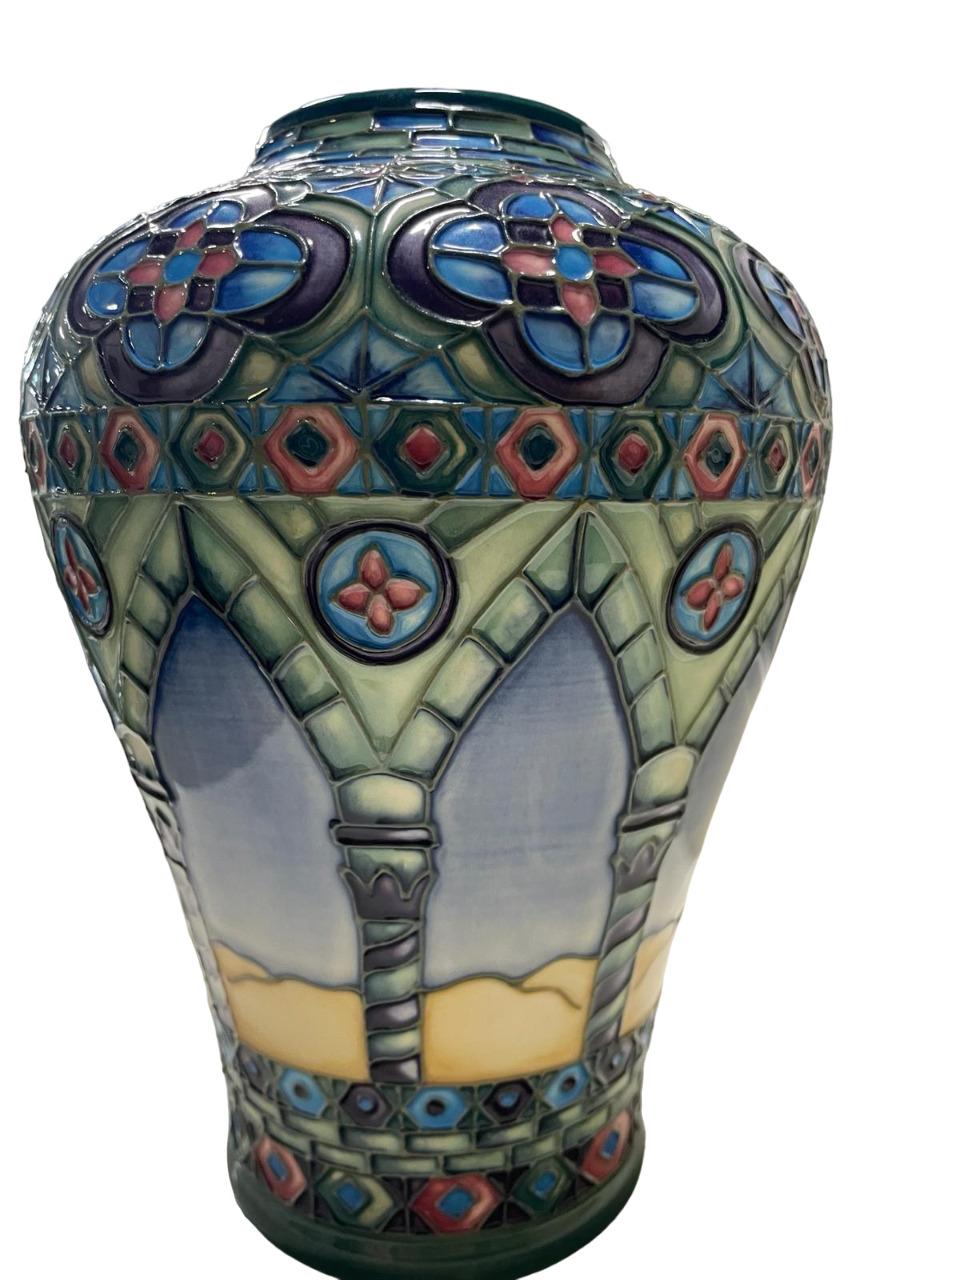 A Modern Moorcroft Meknes Pattern 576/9 Vase, designed by Beverley Wilkes, impressed and painted factory marks, numbered 66/350, underglaze and gold pen.
Lovely Moorcroft Arabic ‘Meknes Vase’ designed by Beverley Wilkes, with tube-line decoration.